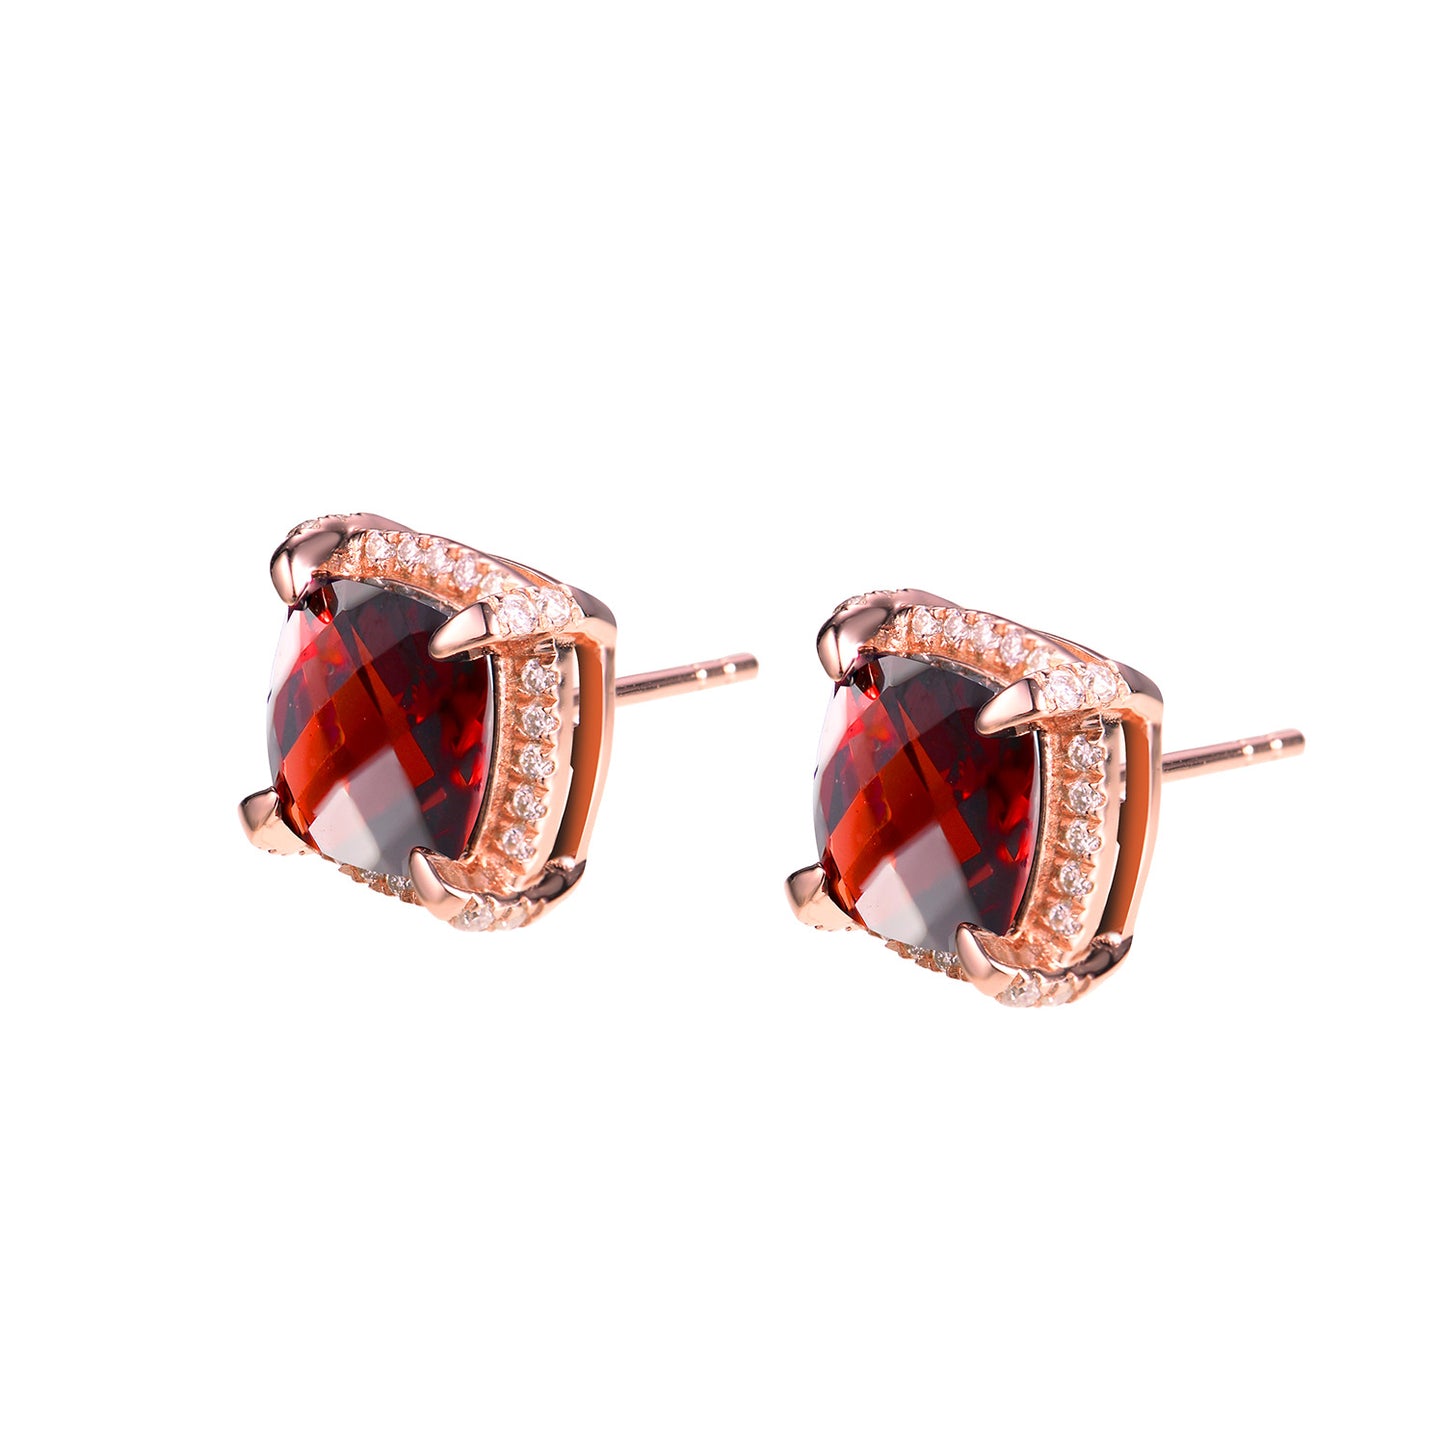 Soleste Halo Square Natural Red Garnet Silver Stud Earrings